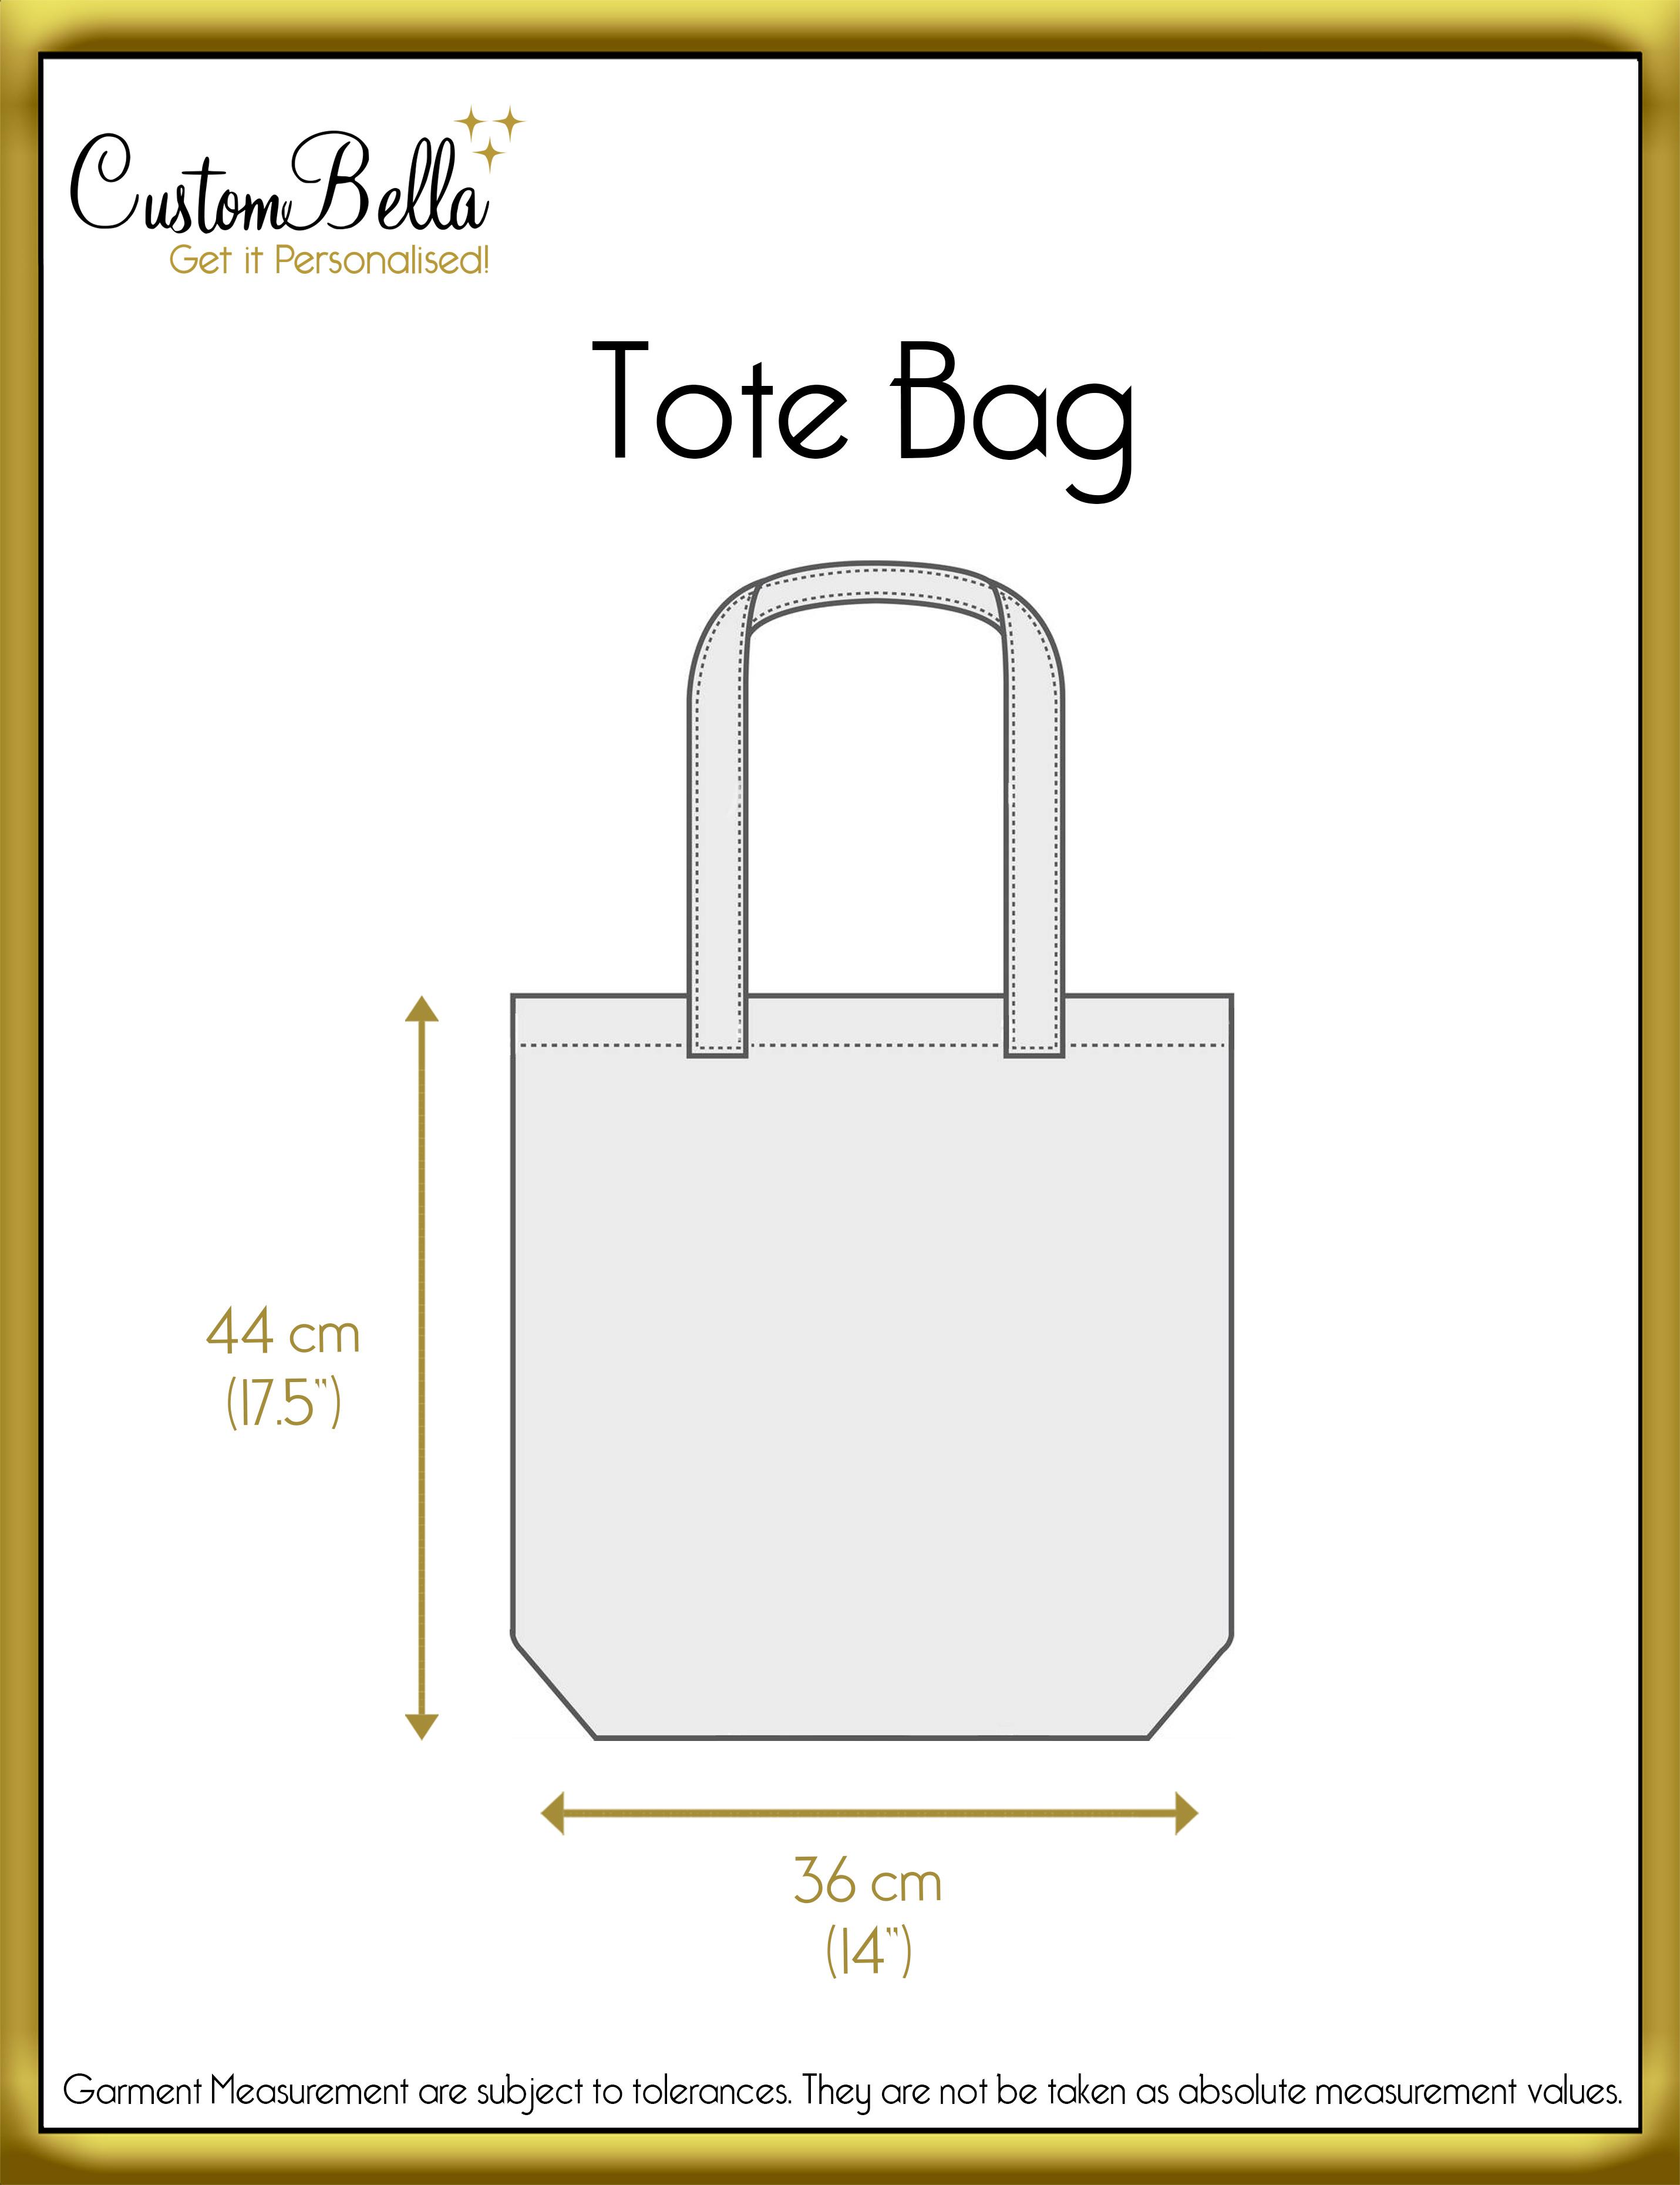 Personalised Printed Tote Bag size chart